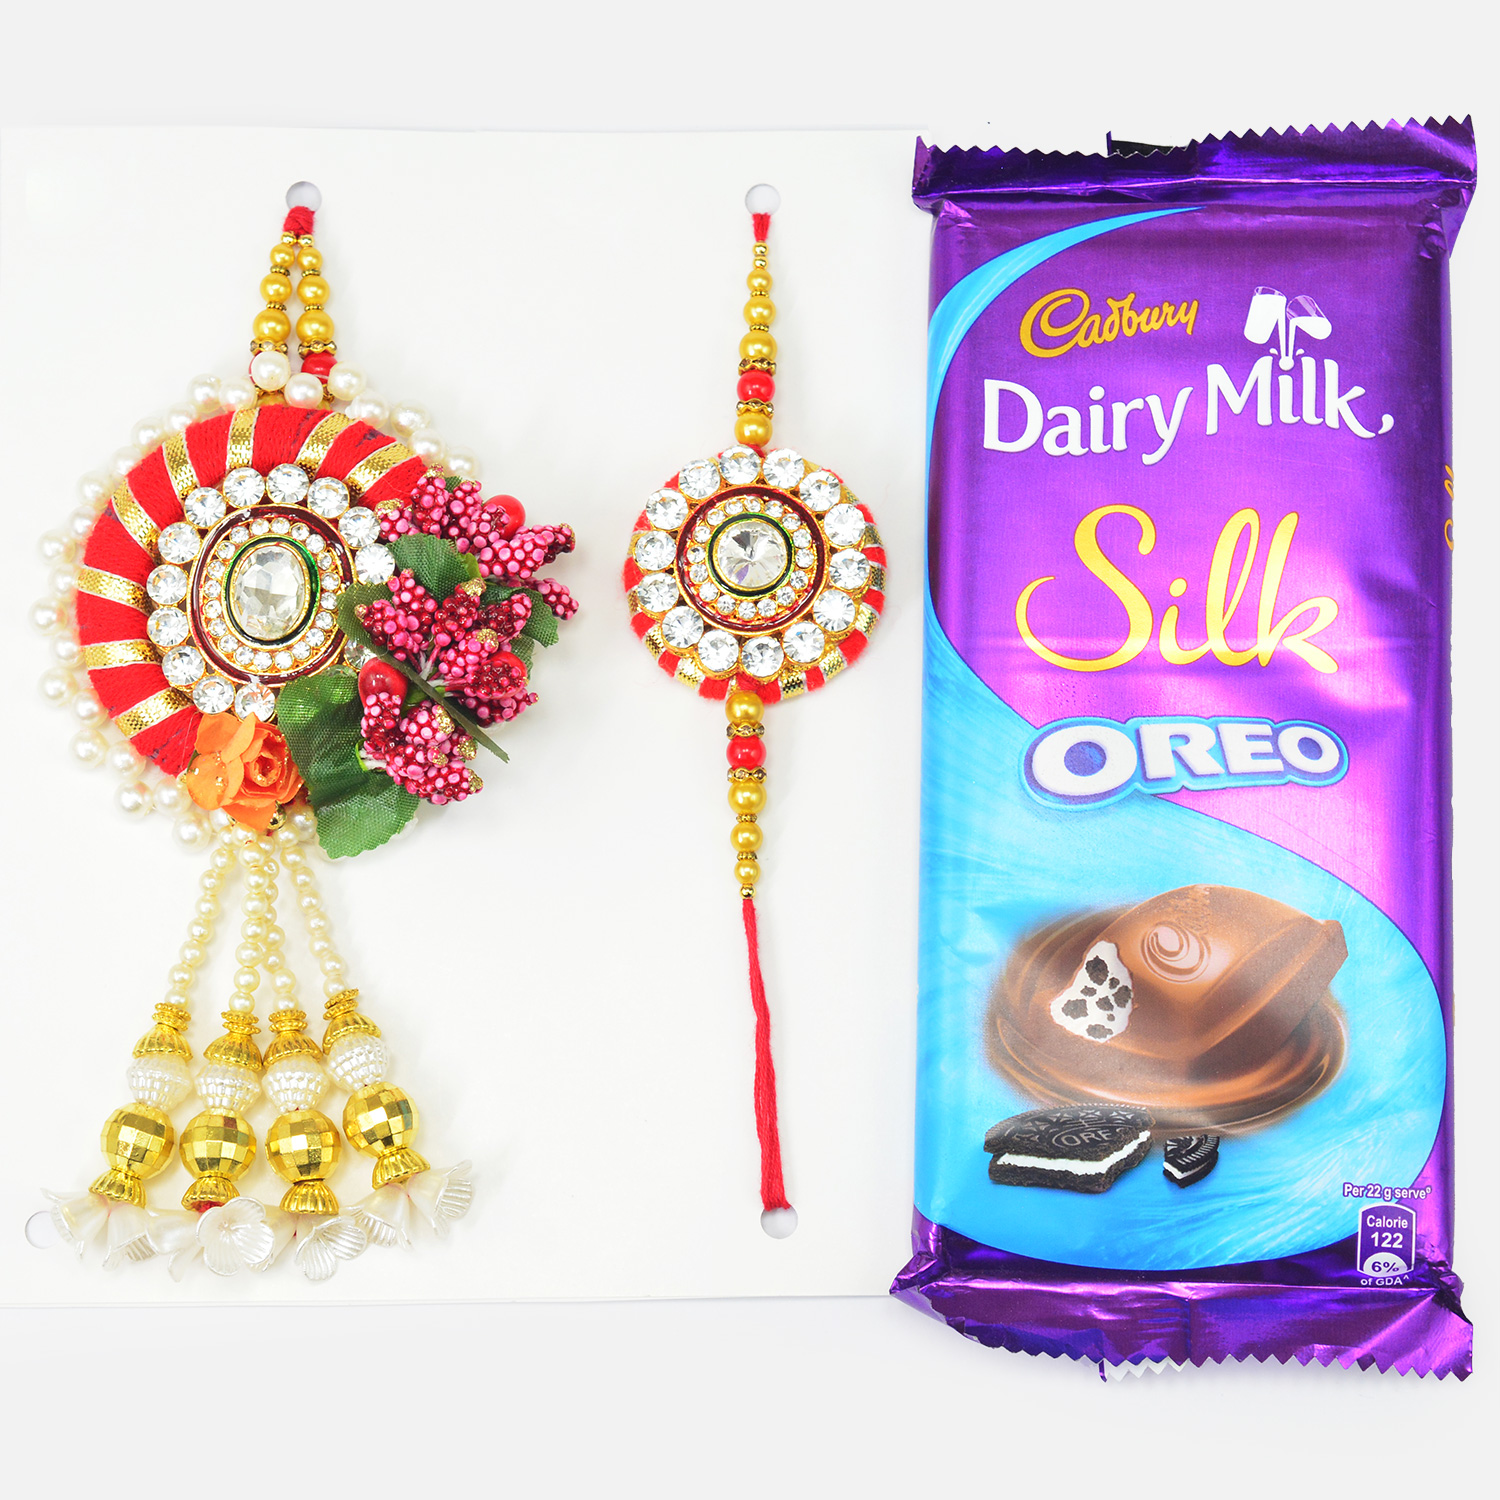 Rich Work Handcrafted Awesome Looking Rakhis with Oreo Chocolate By Cadbury